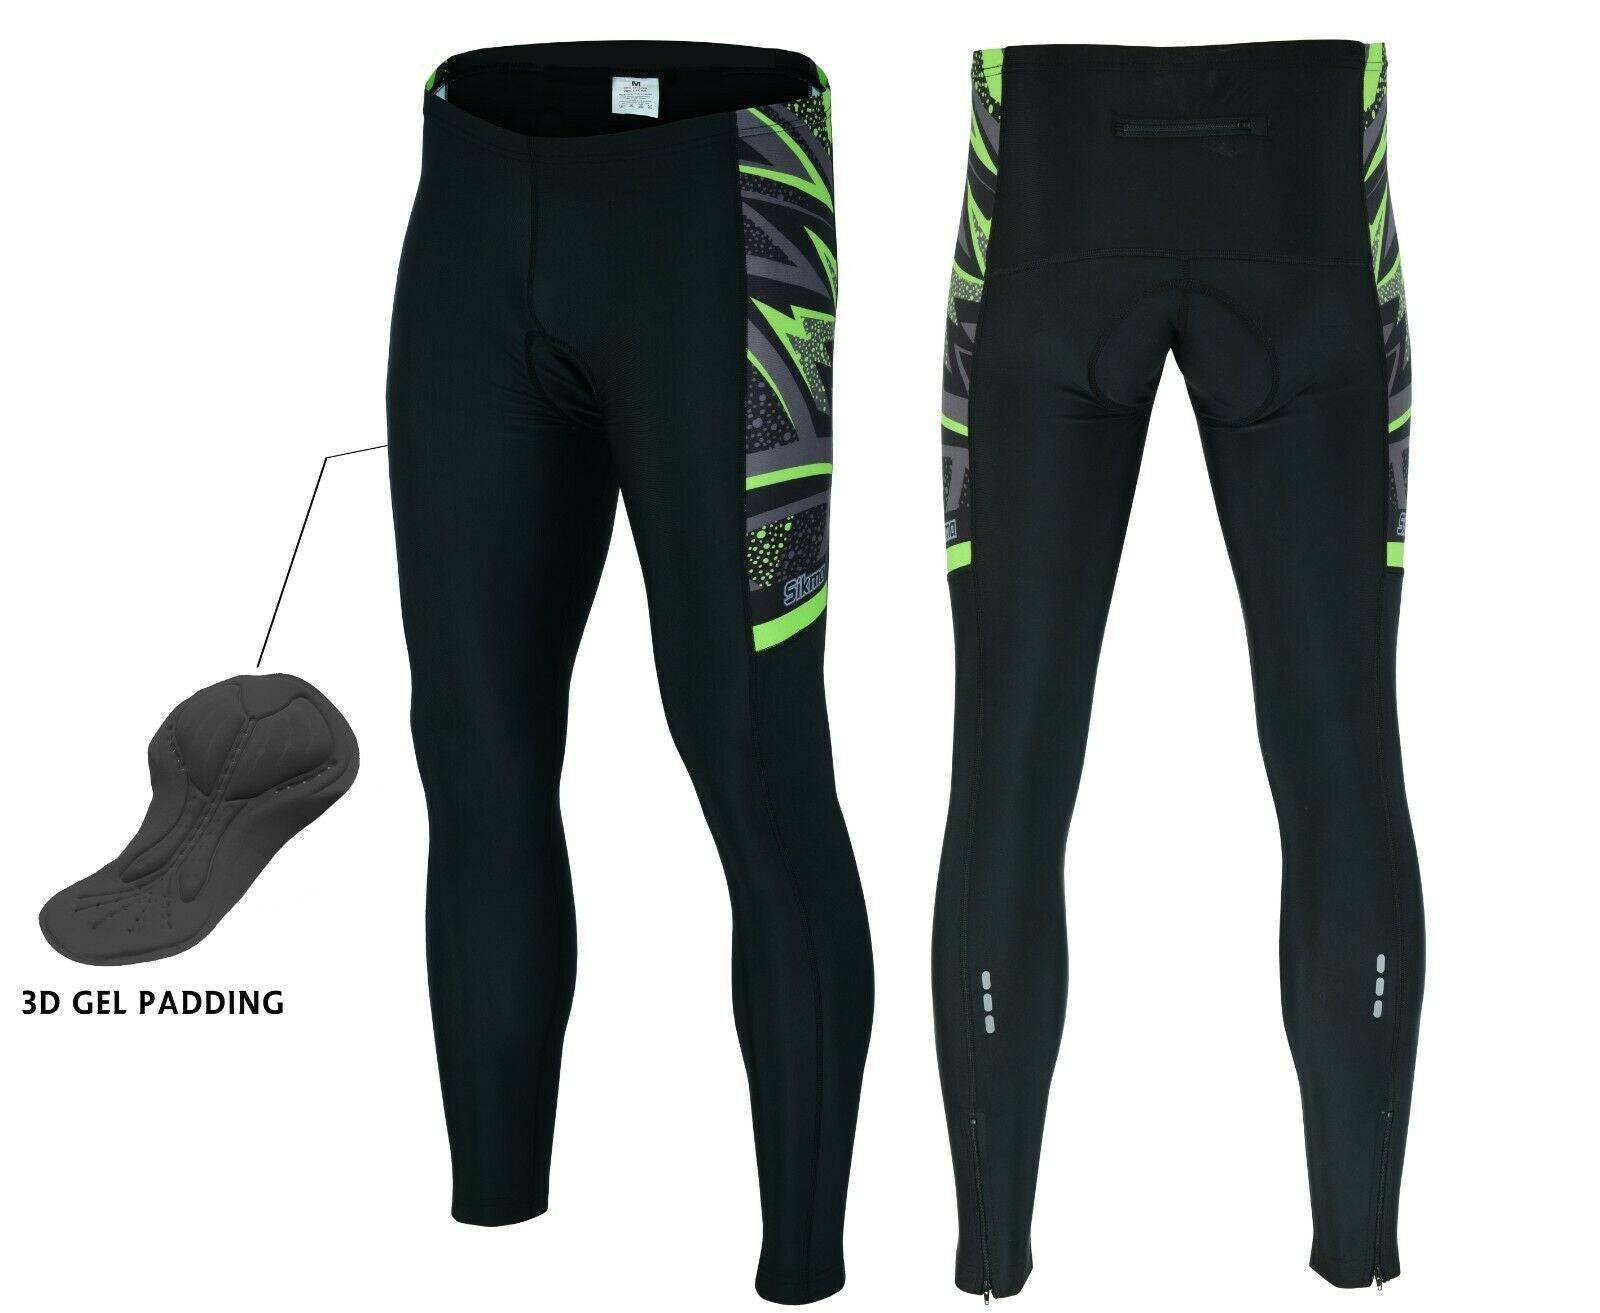 Men's Cycling Gel Padded Tights